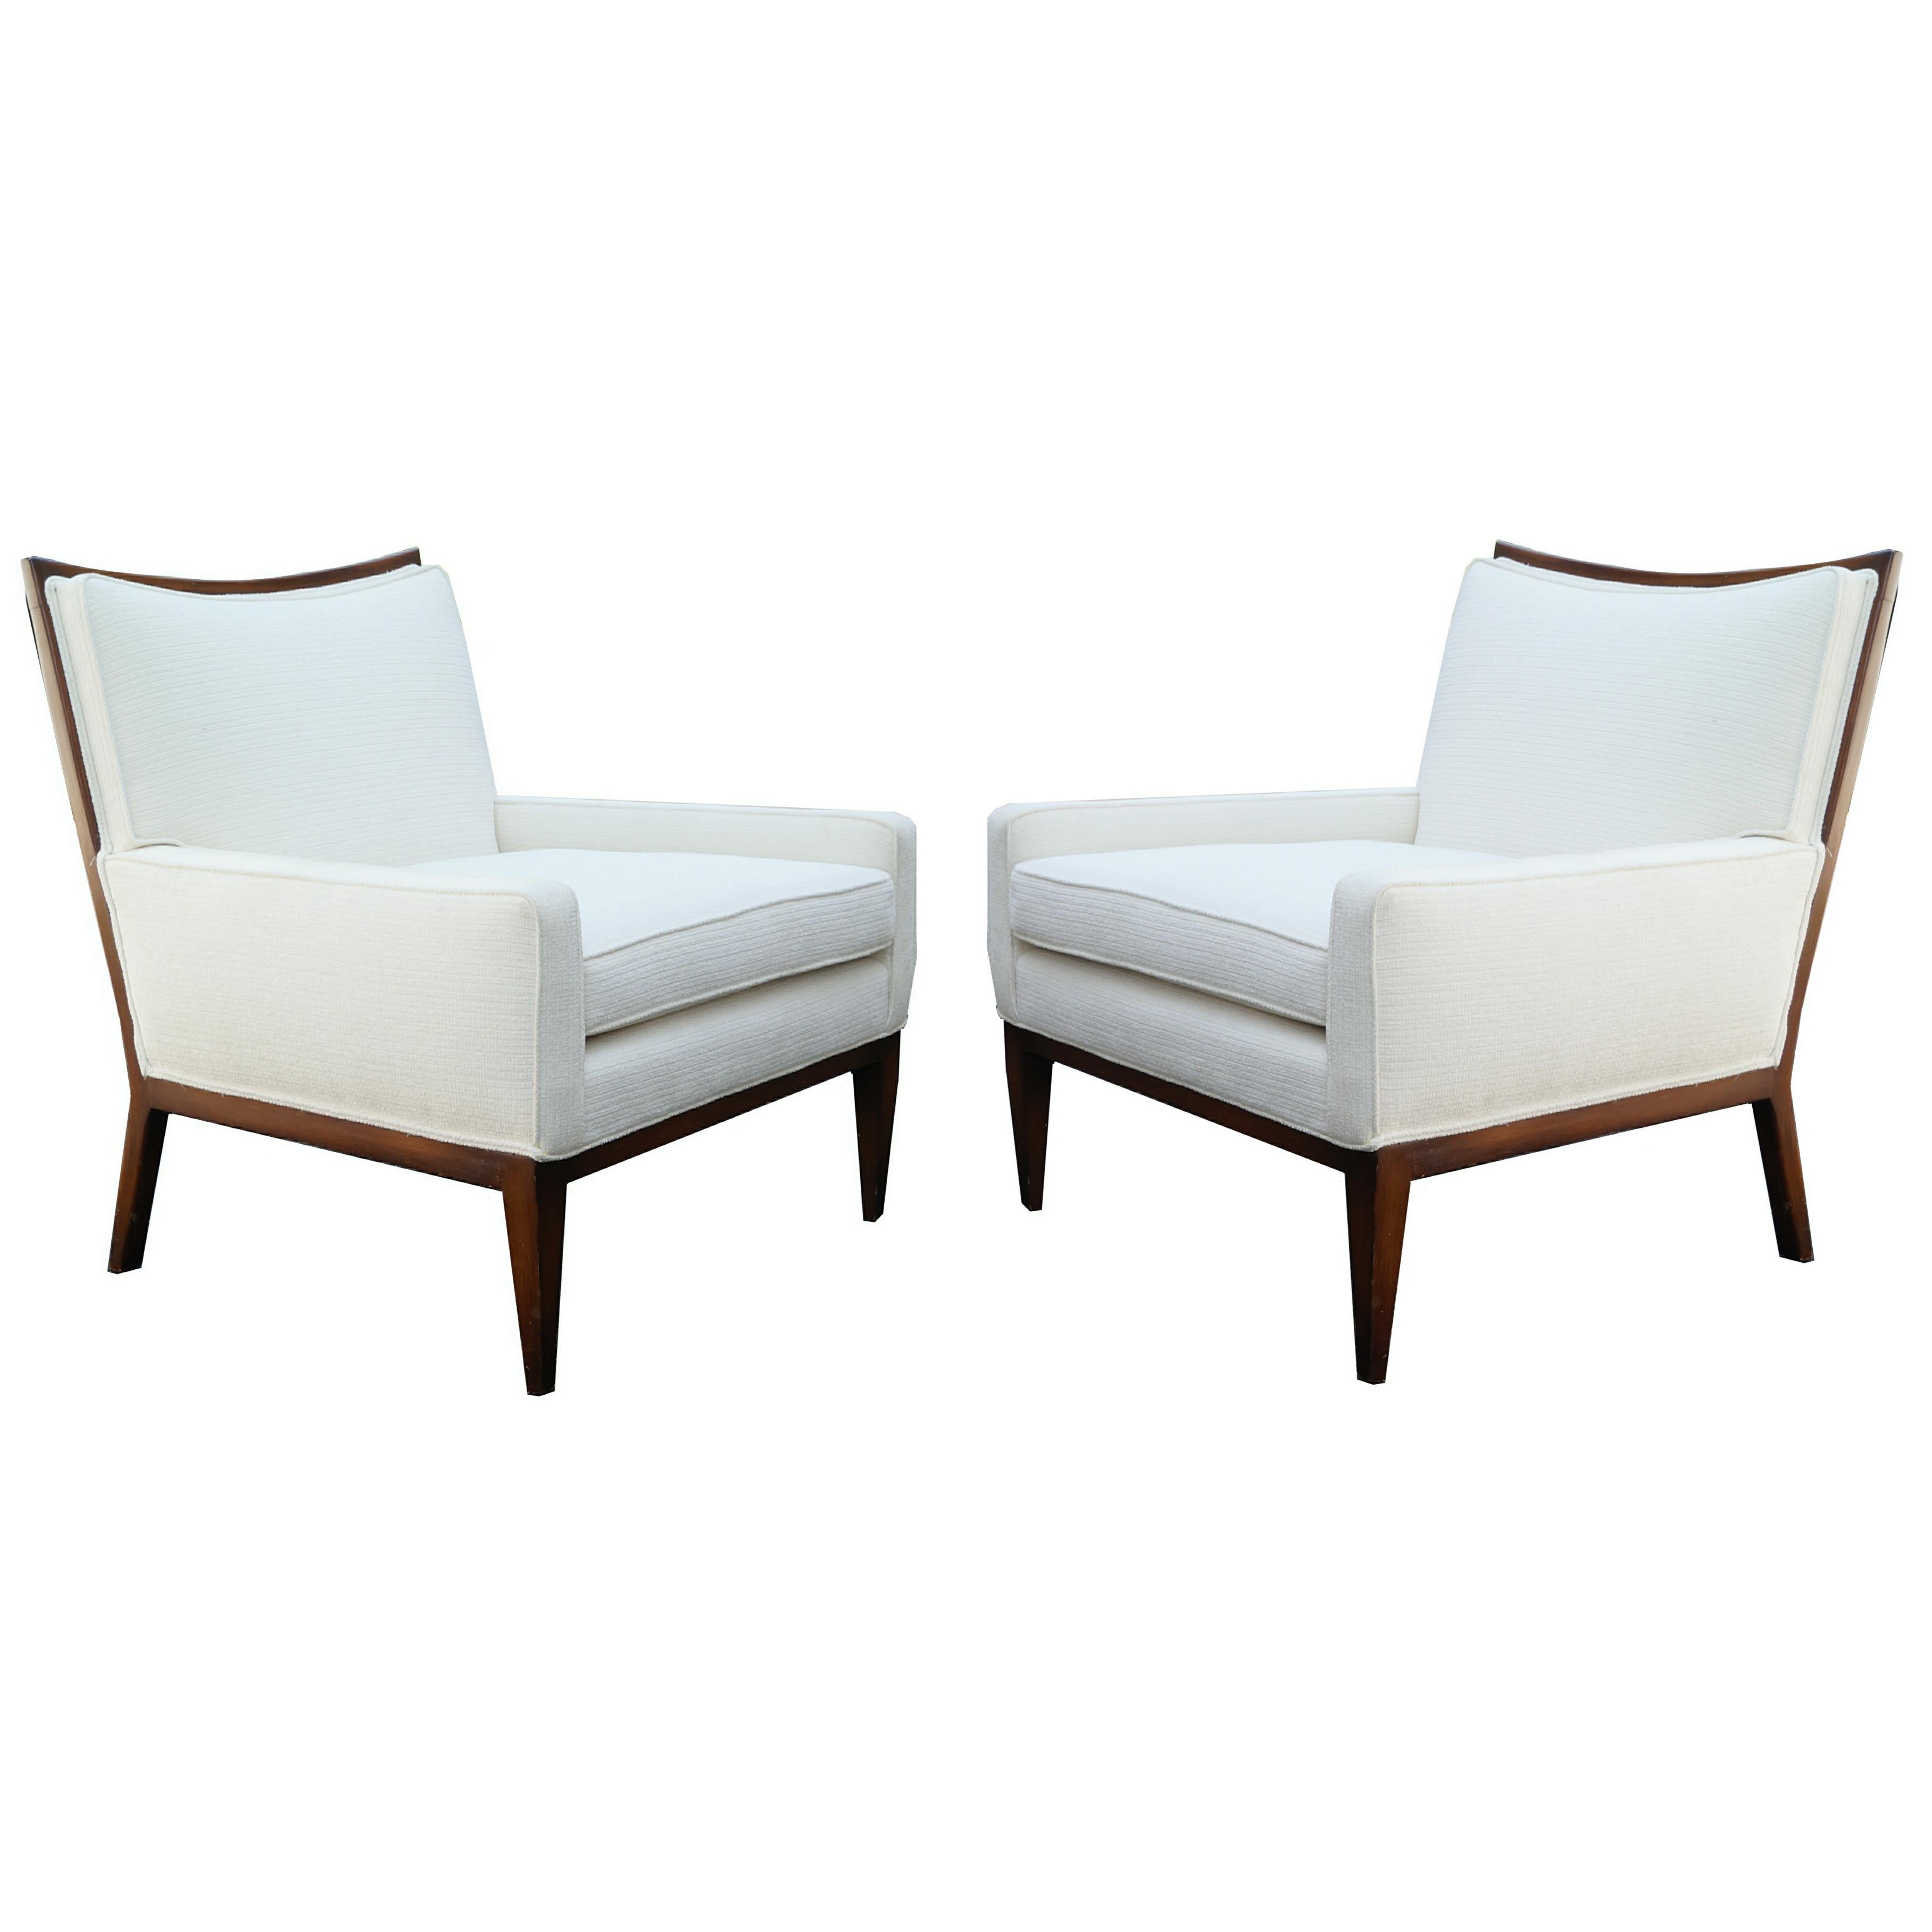 1950's Mid-Century Modern Lounge Chairs Manner of Paul McCobb